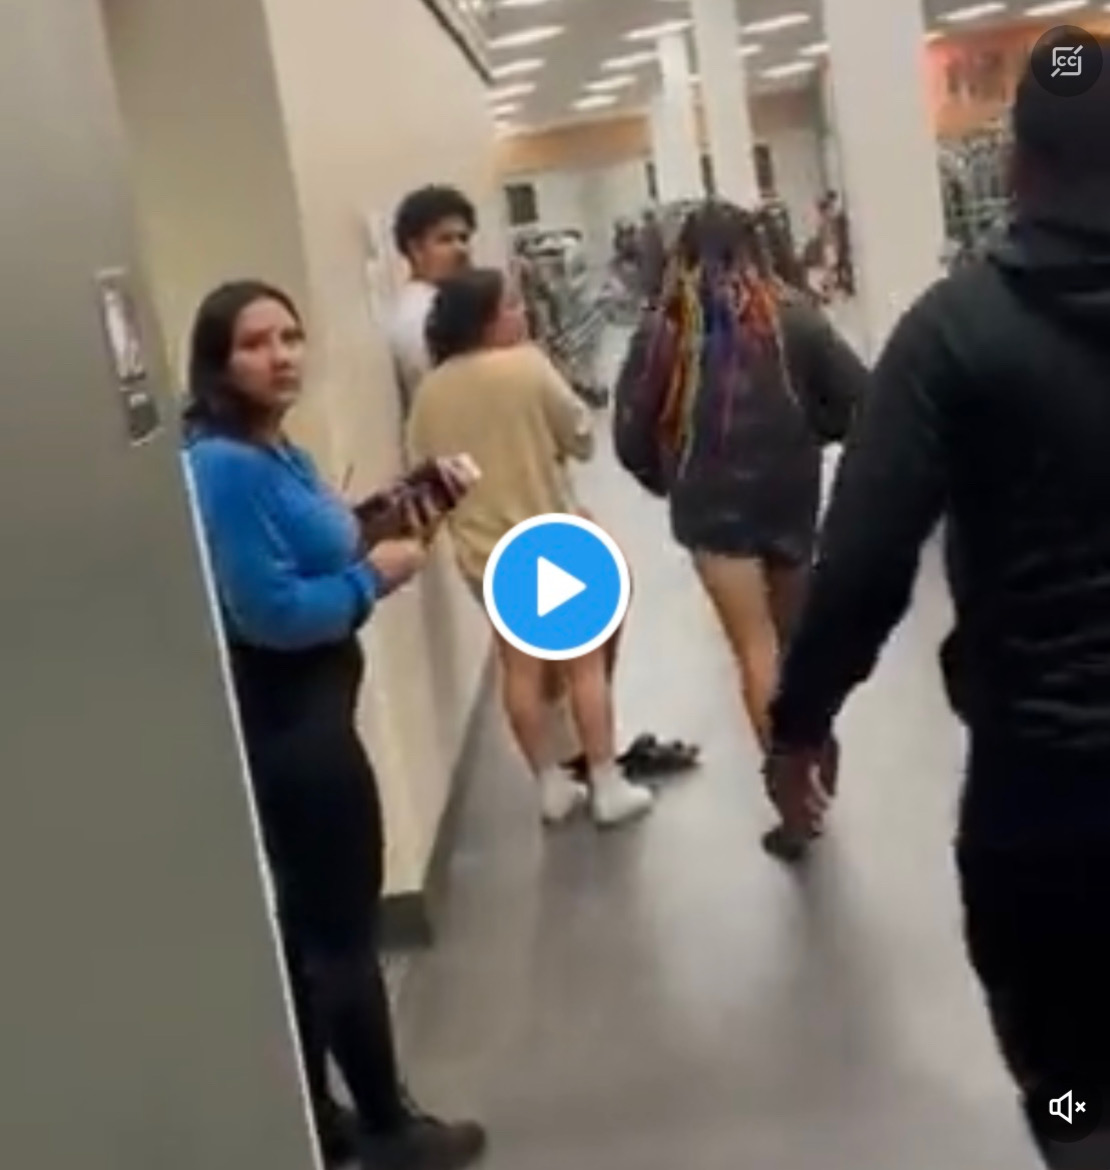 Video of 69 getting jumped at la fitness